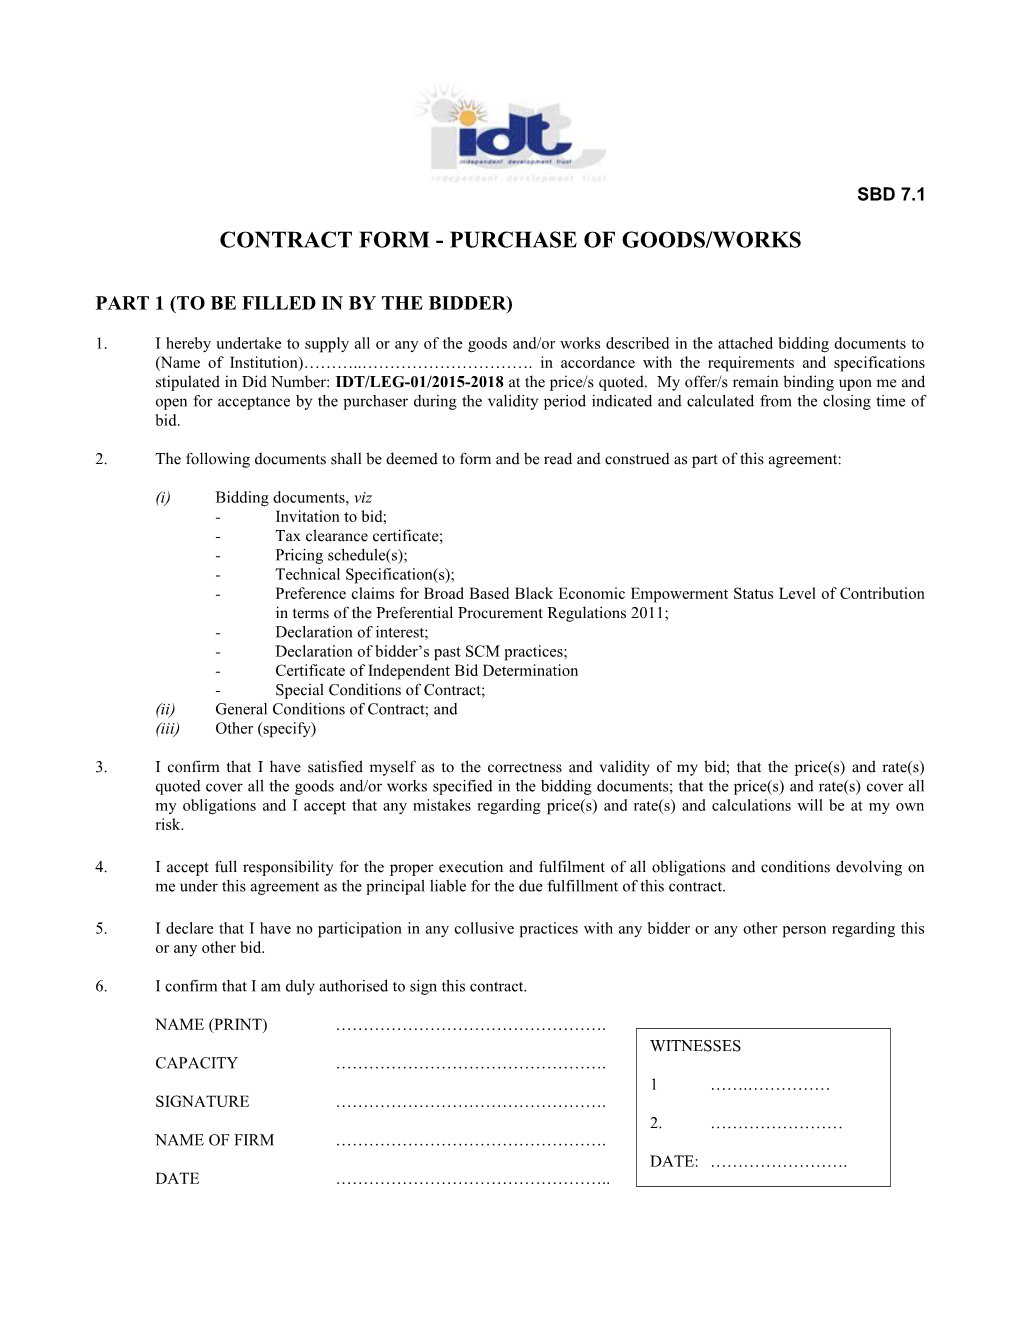 Contract Form - Purchase of Goods/Works